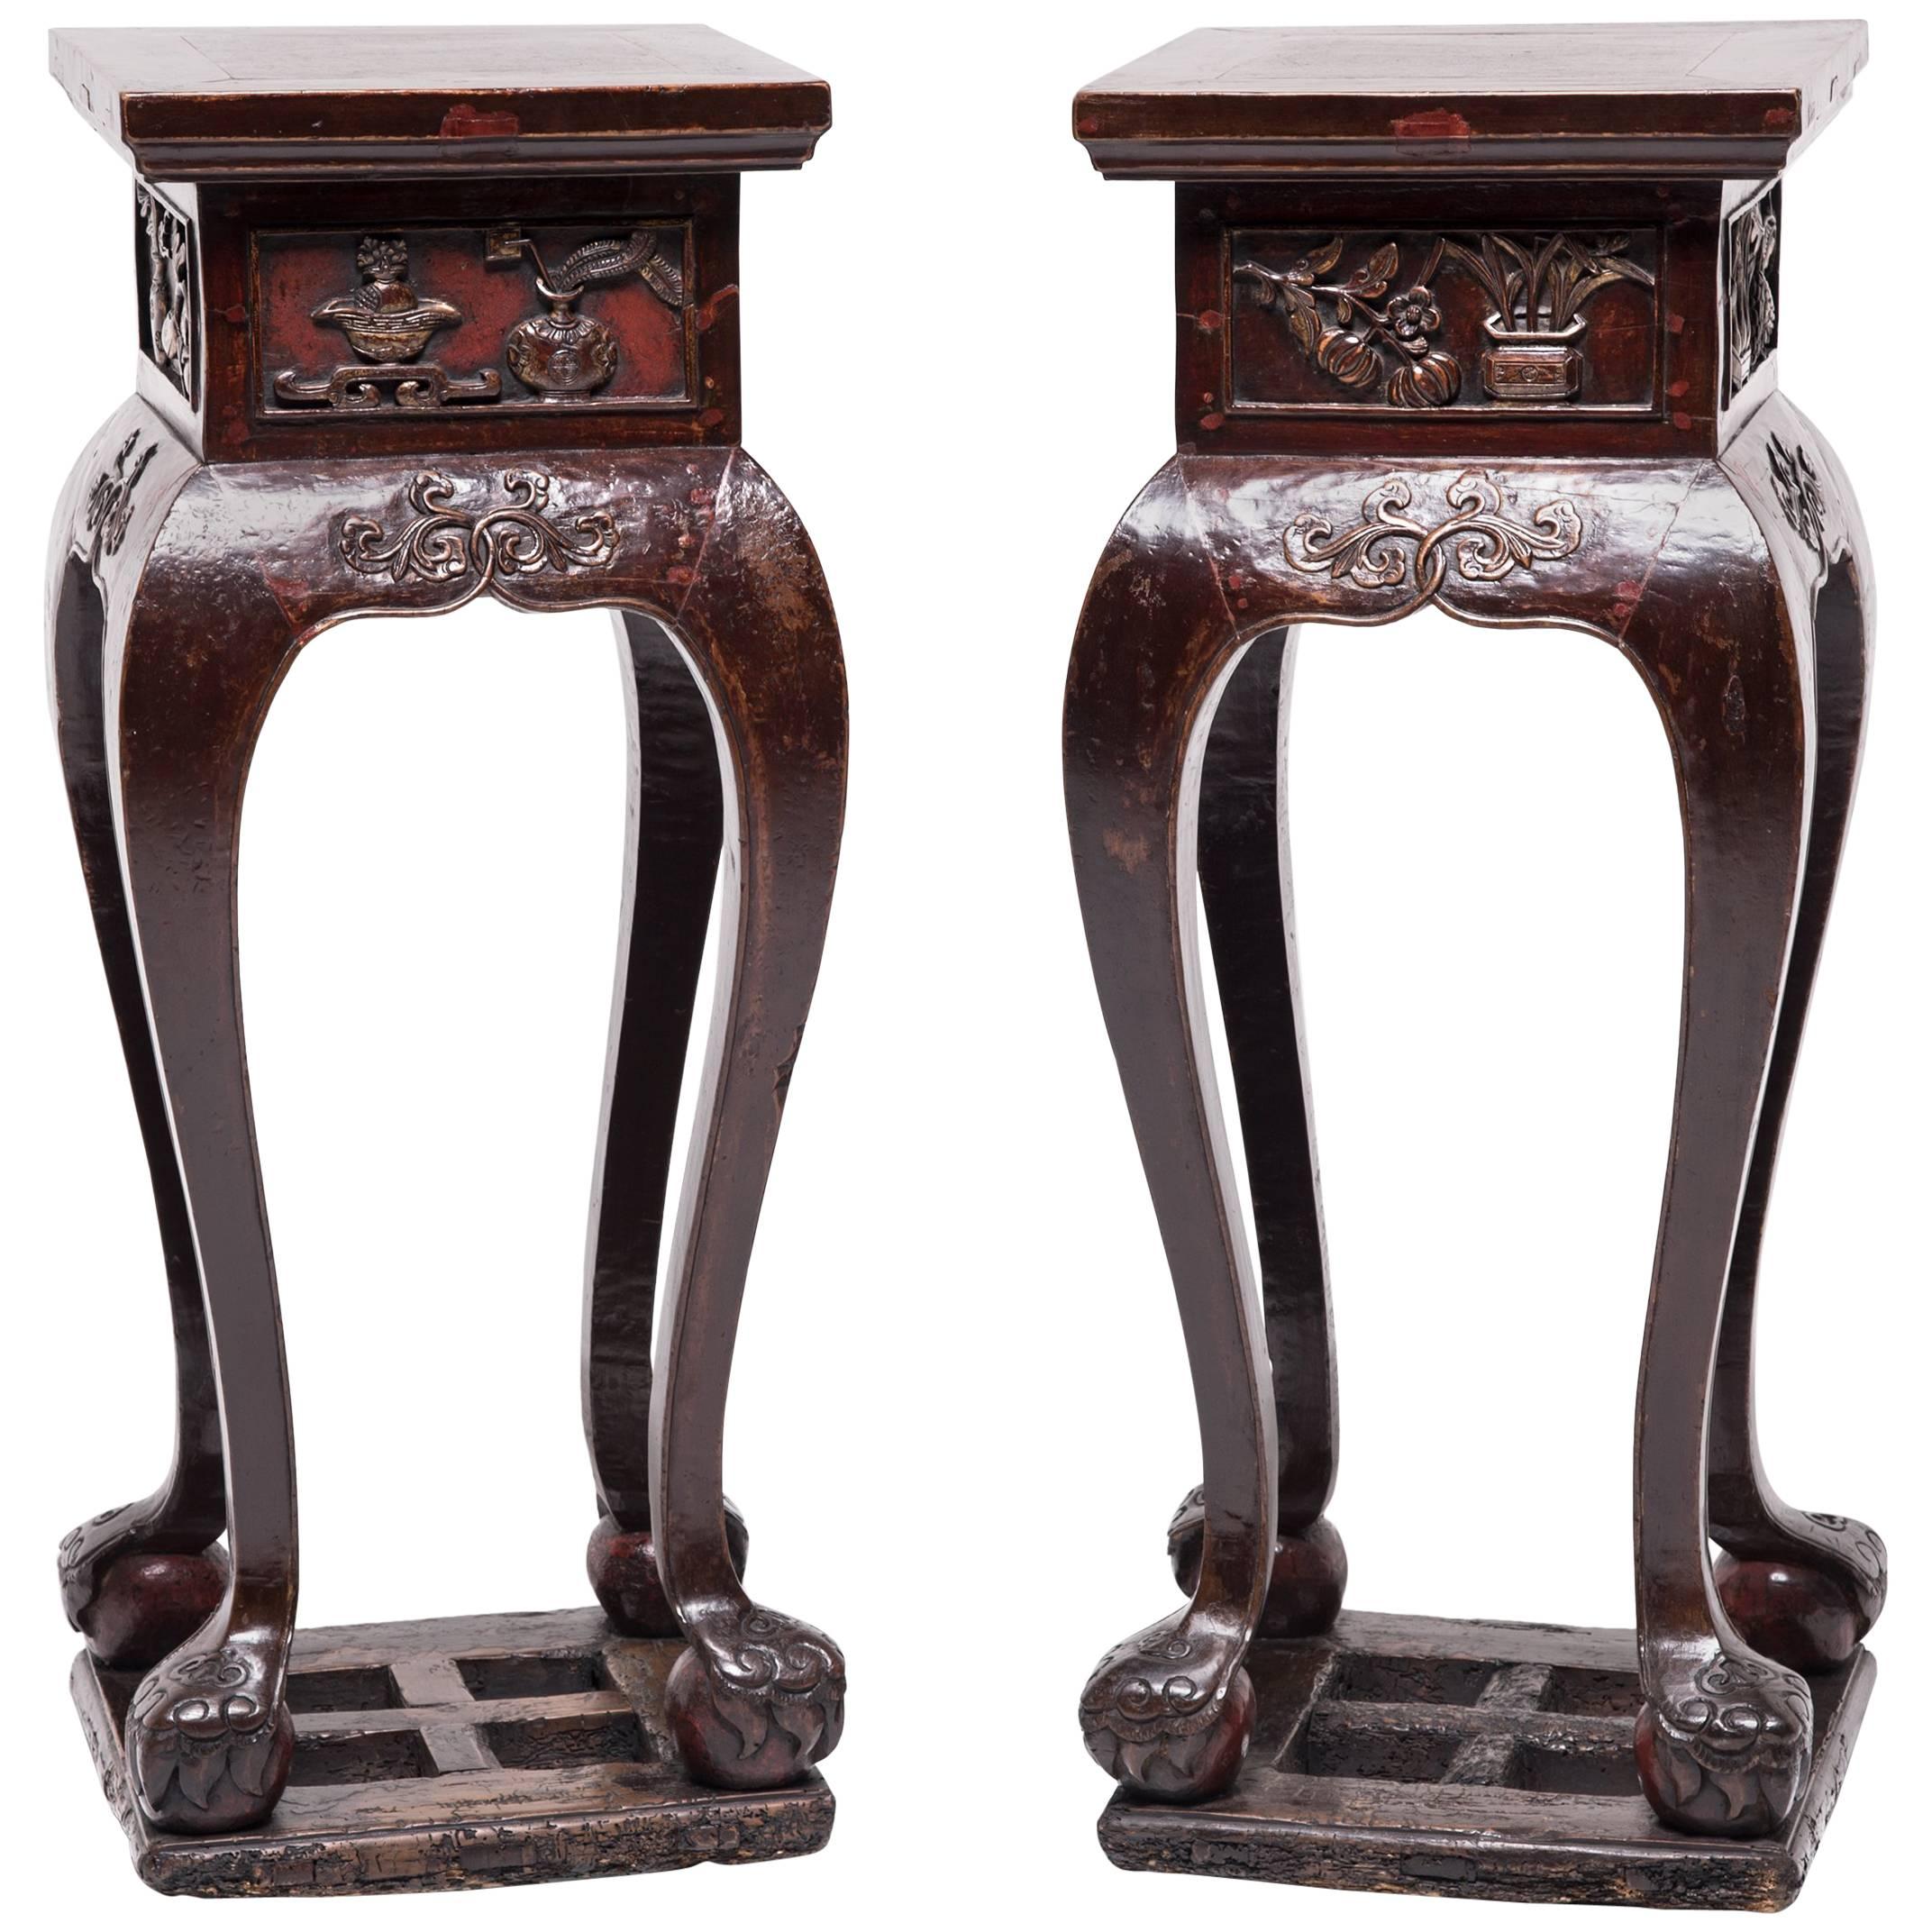 Pair of Mid-19th Century Chinese Plant Stands